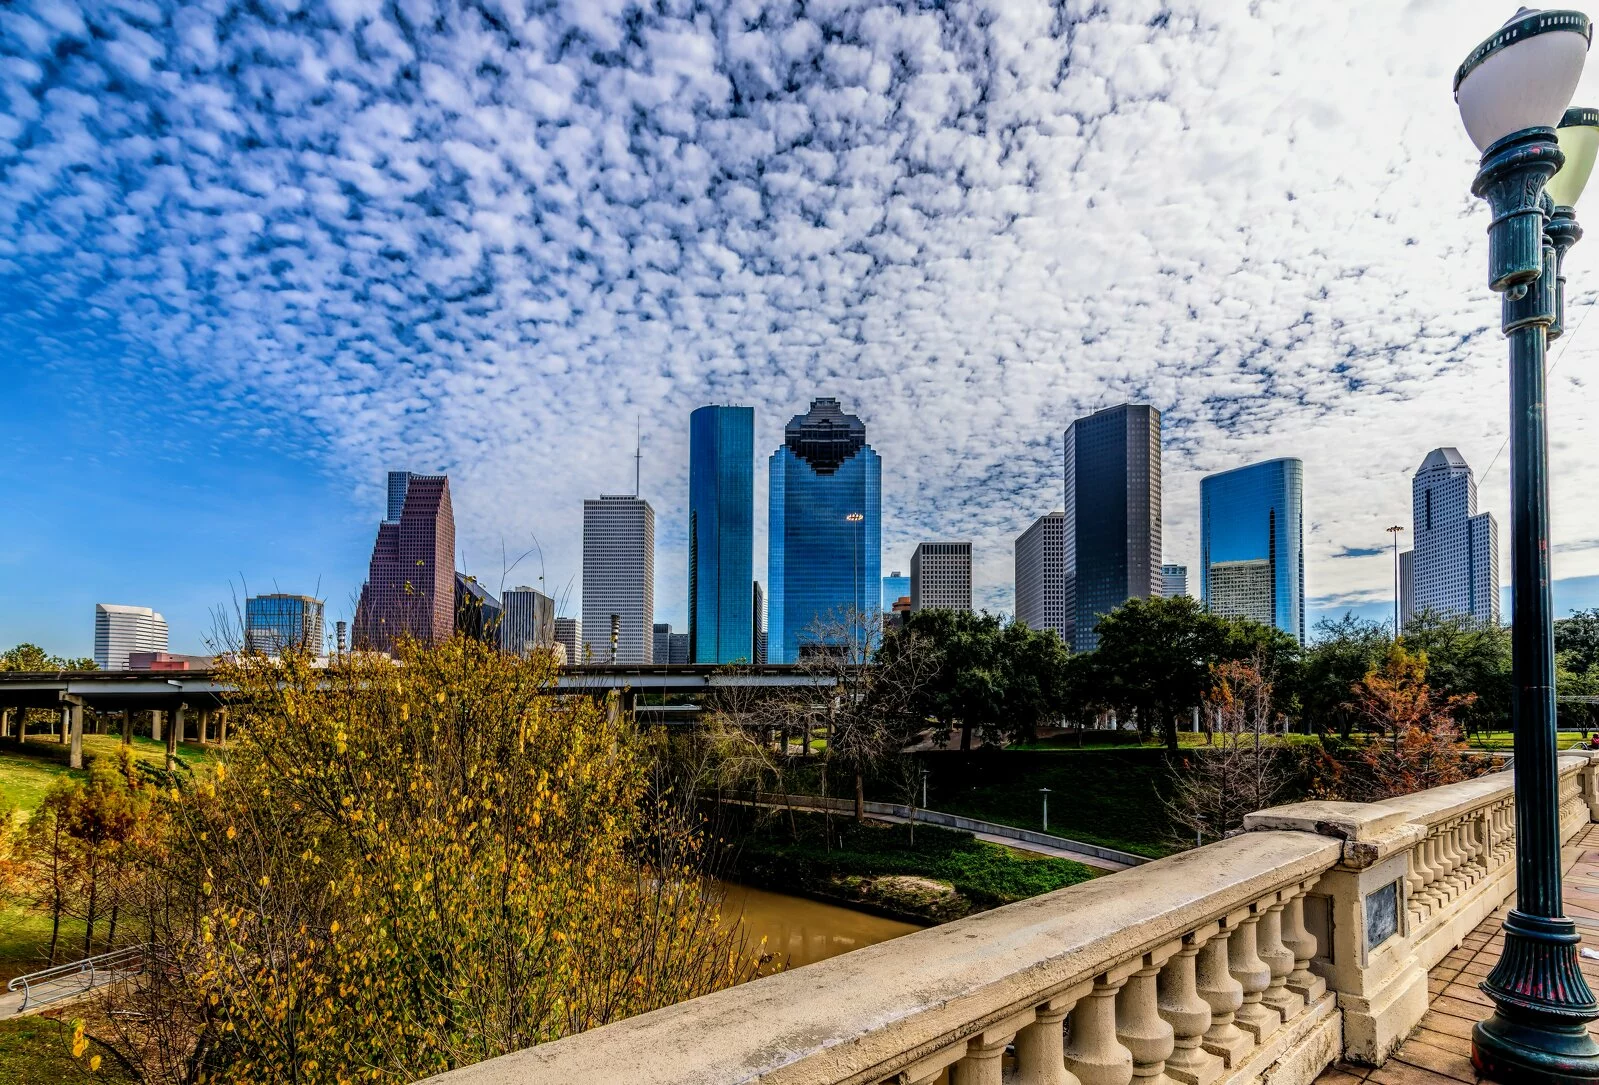 landscape photo of the Houston skyline, photo taken from a bridge, skyscrapers in background, photo taken on a sunny day with clouds.